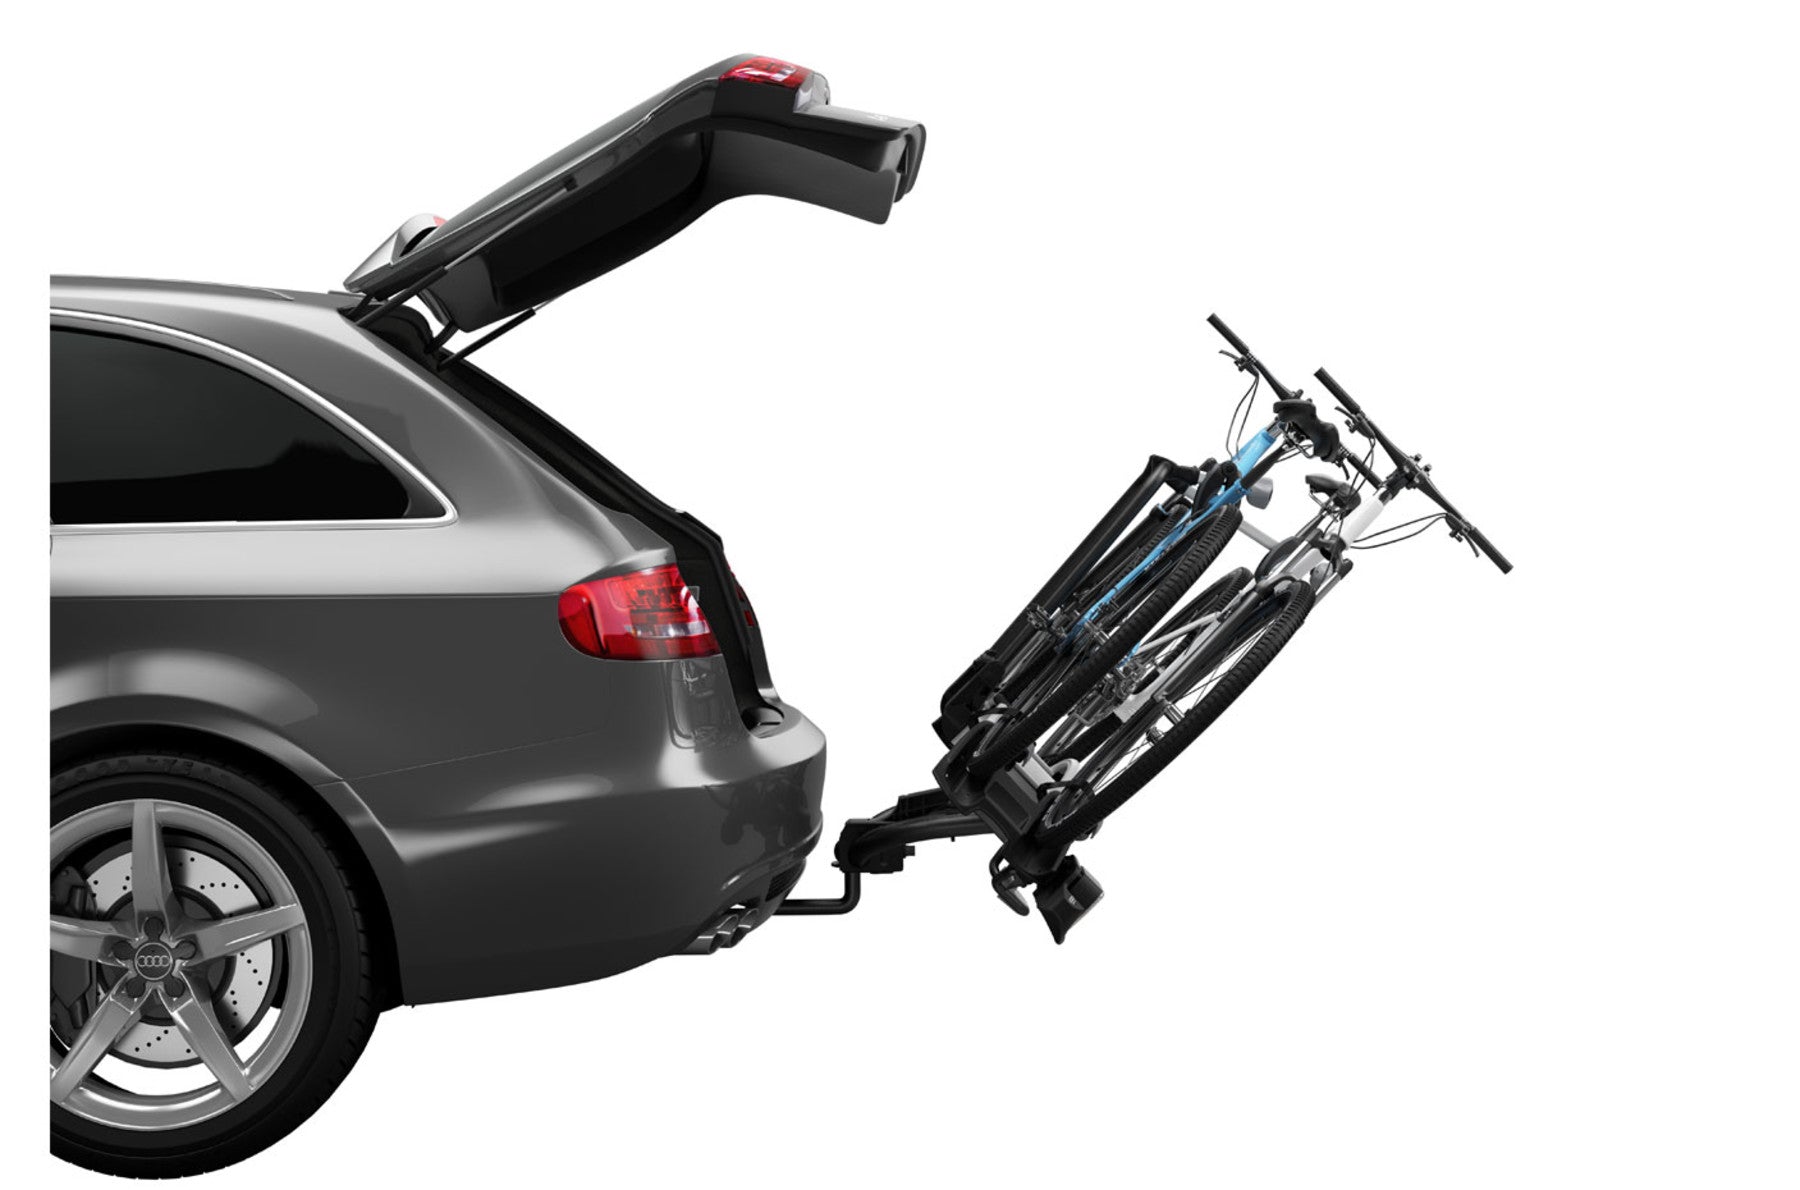 THULE VeloCompact 924 2 Bike Cycle Carrier - NEWEST 13 Pin Model